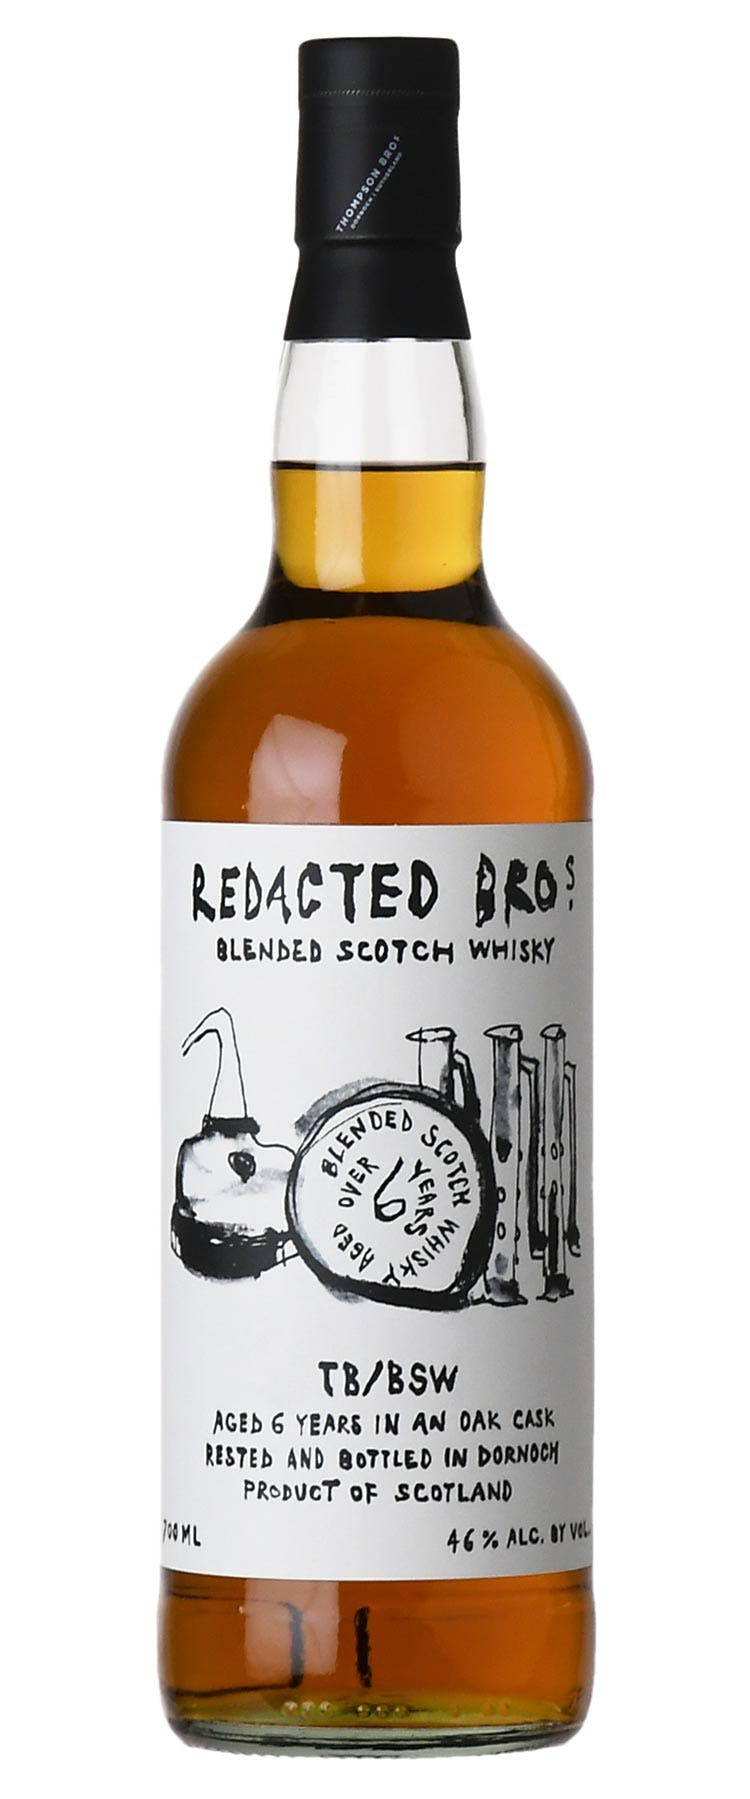 Redacted Bros blended scotch whisky